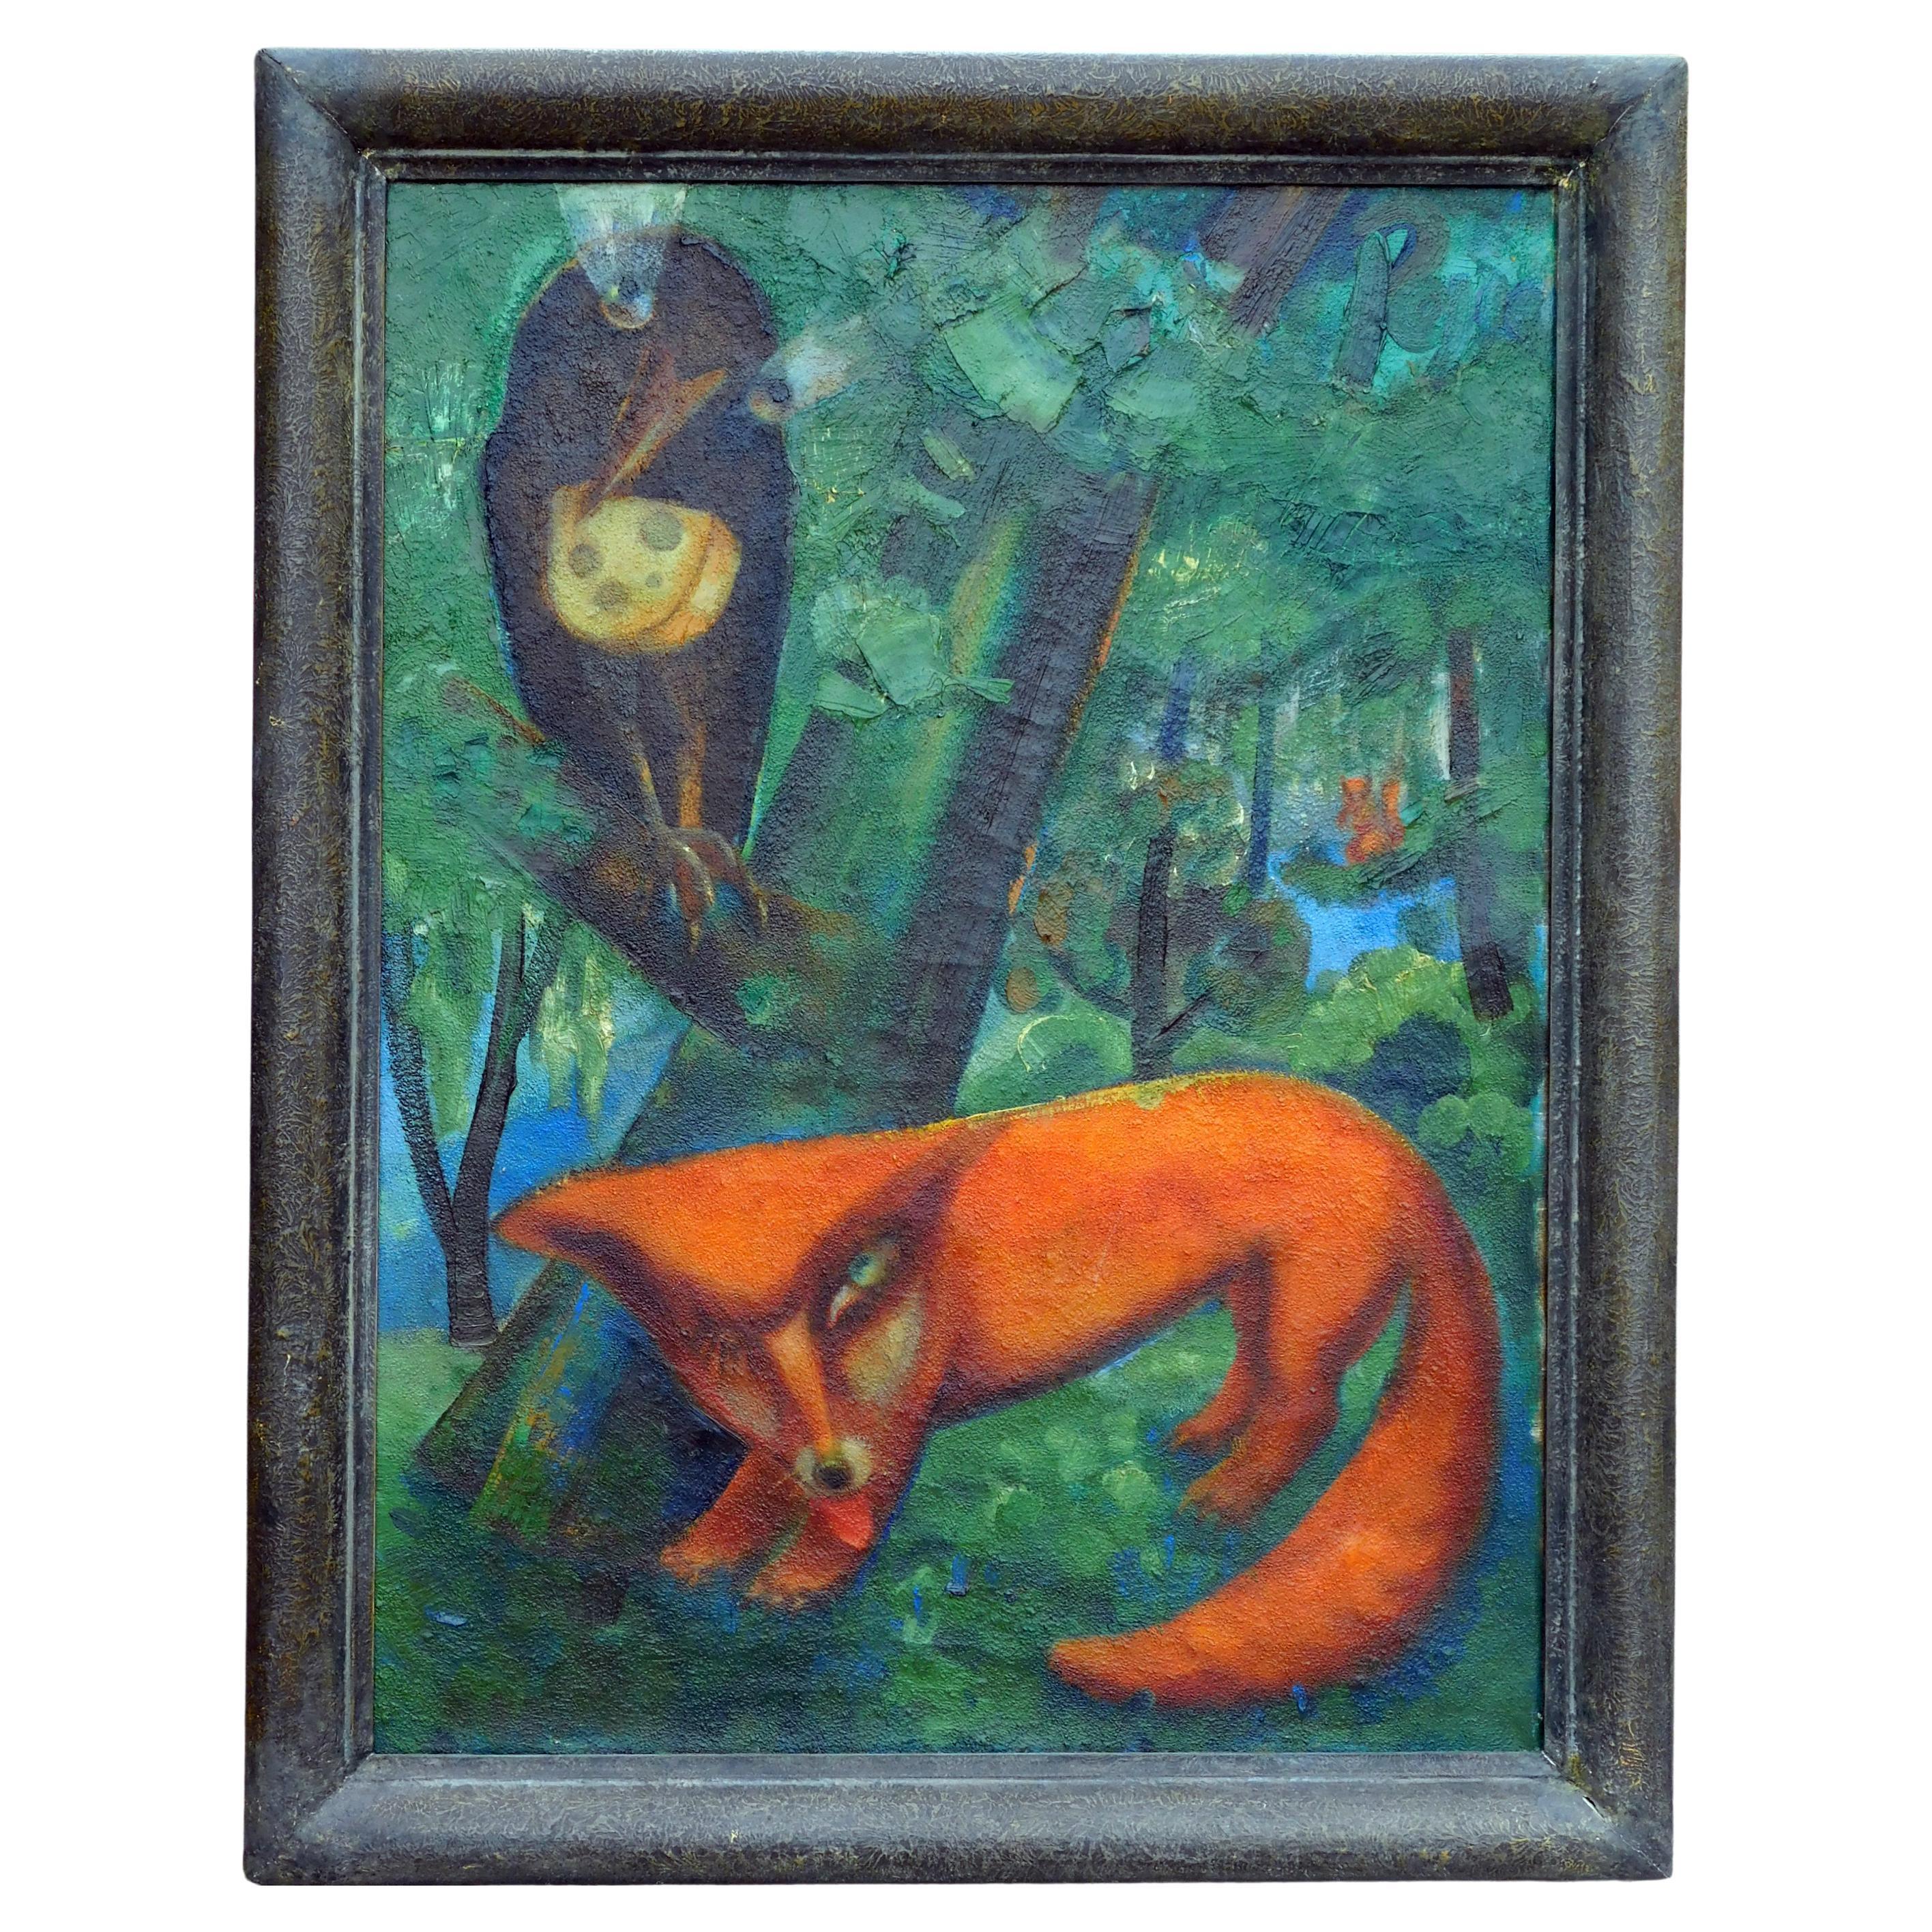 Vjecoslav Pejacevic Slovakian Painting, Aesop’s Fable the Fox and the Crow For Sale